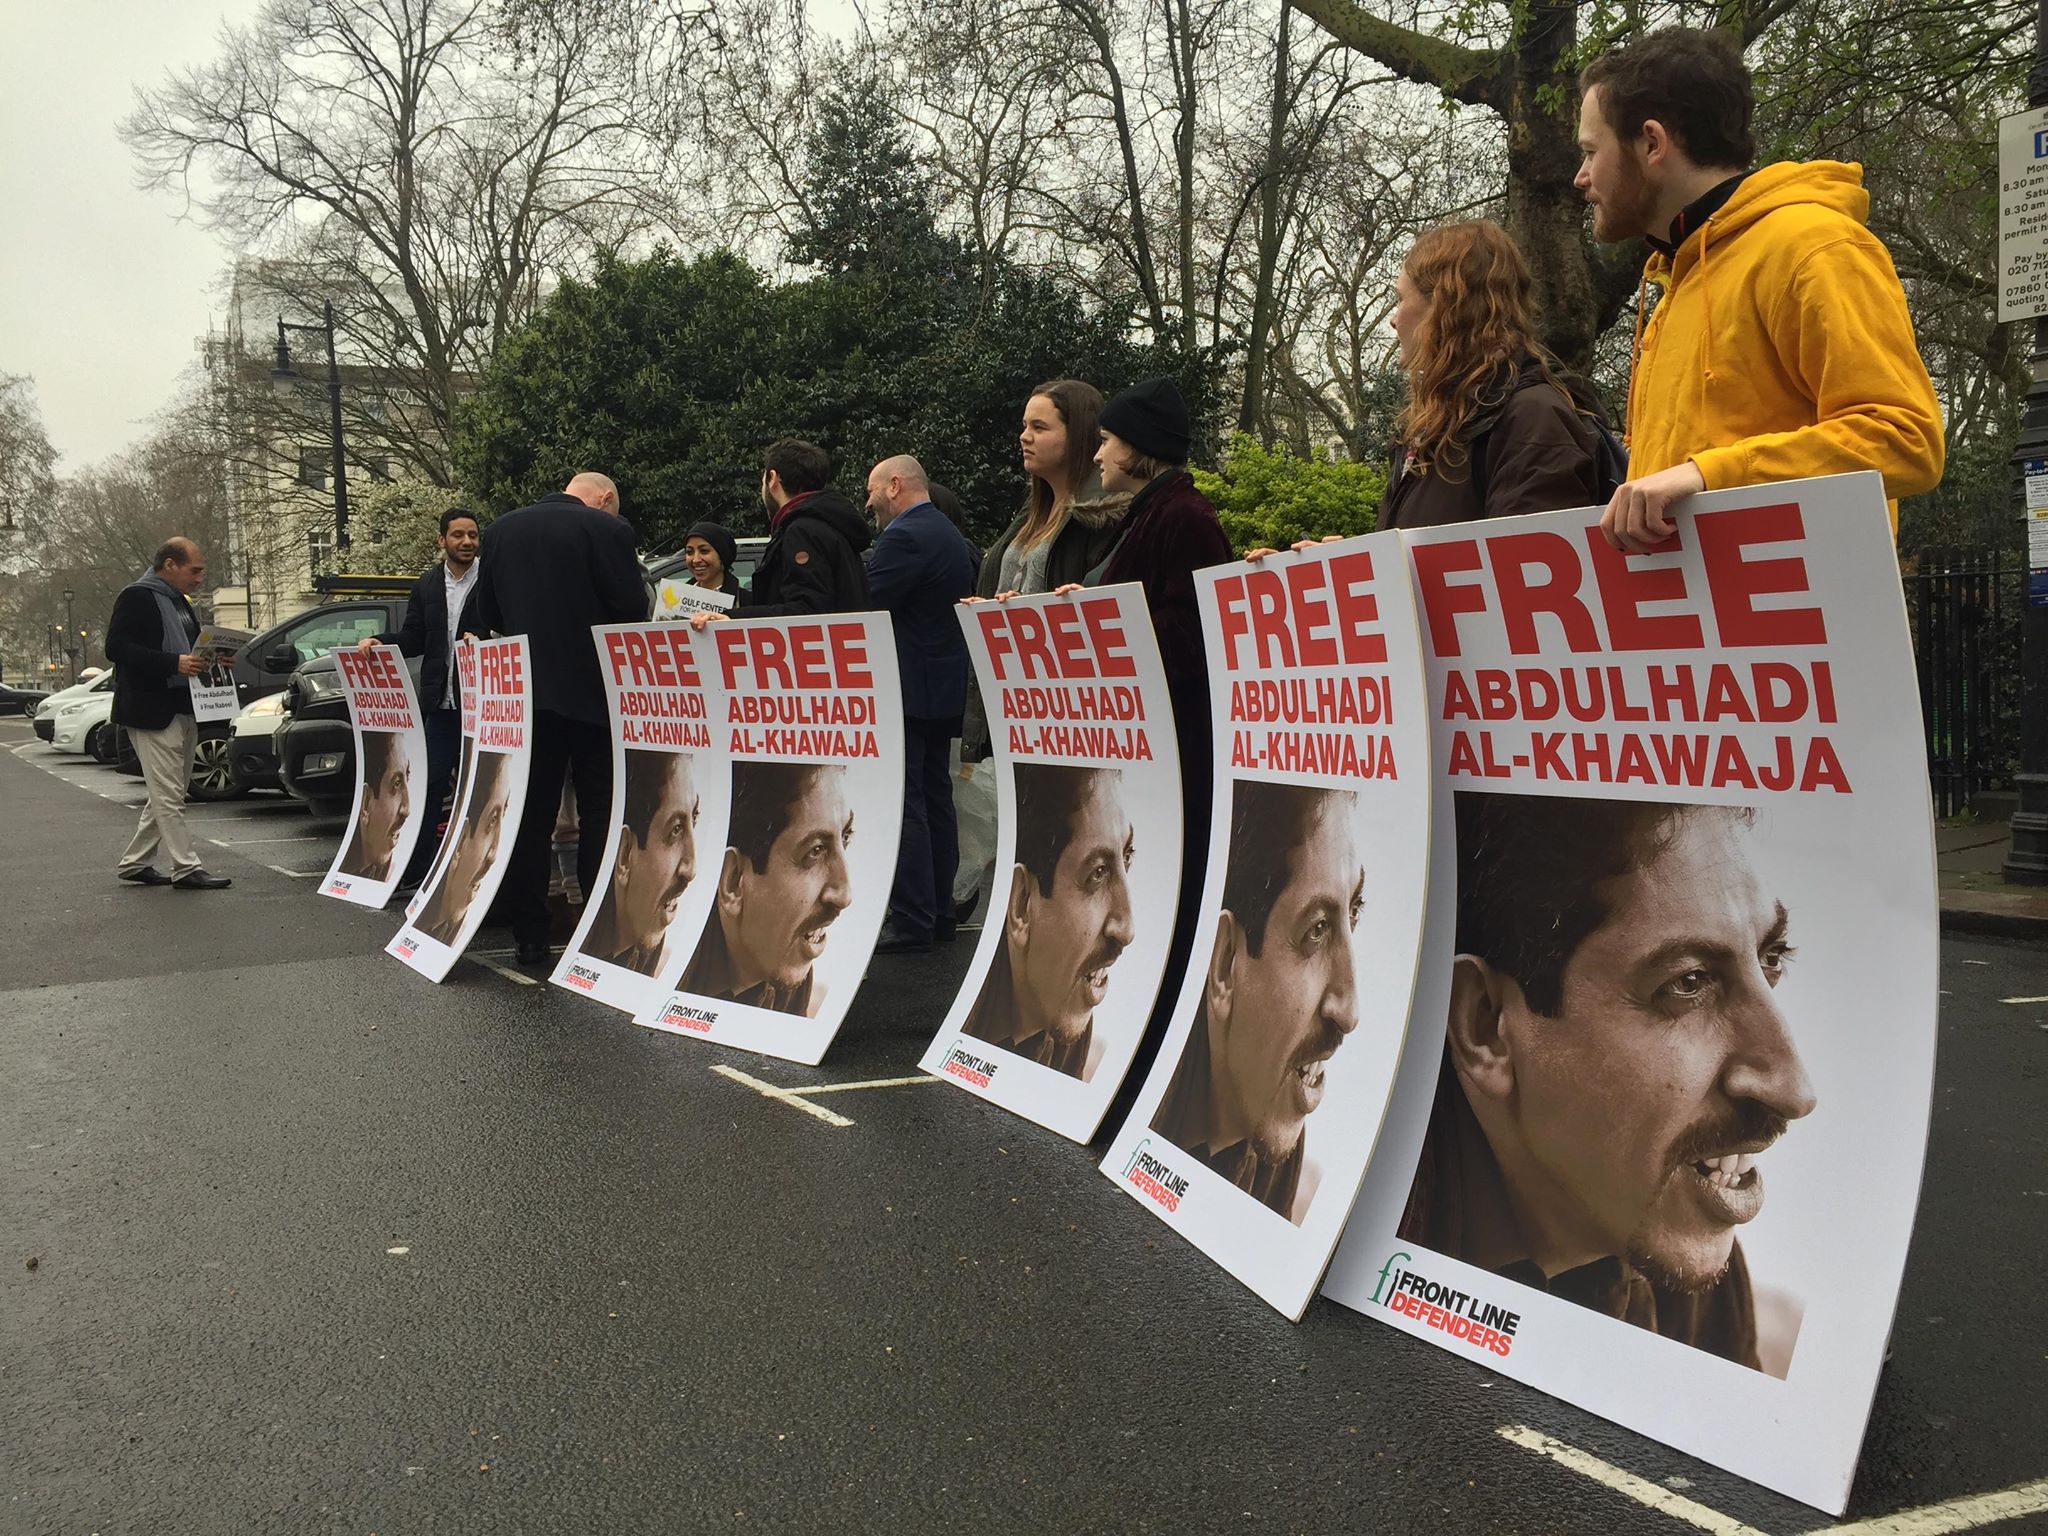 Bahrain: Calls for Abdulhadi al-Khawaja’s release from prison shine light on persecution of activists